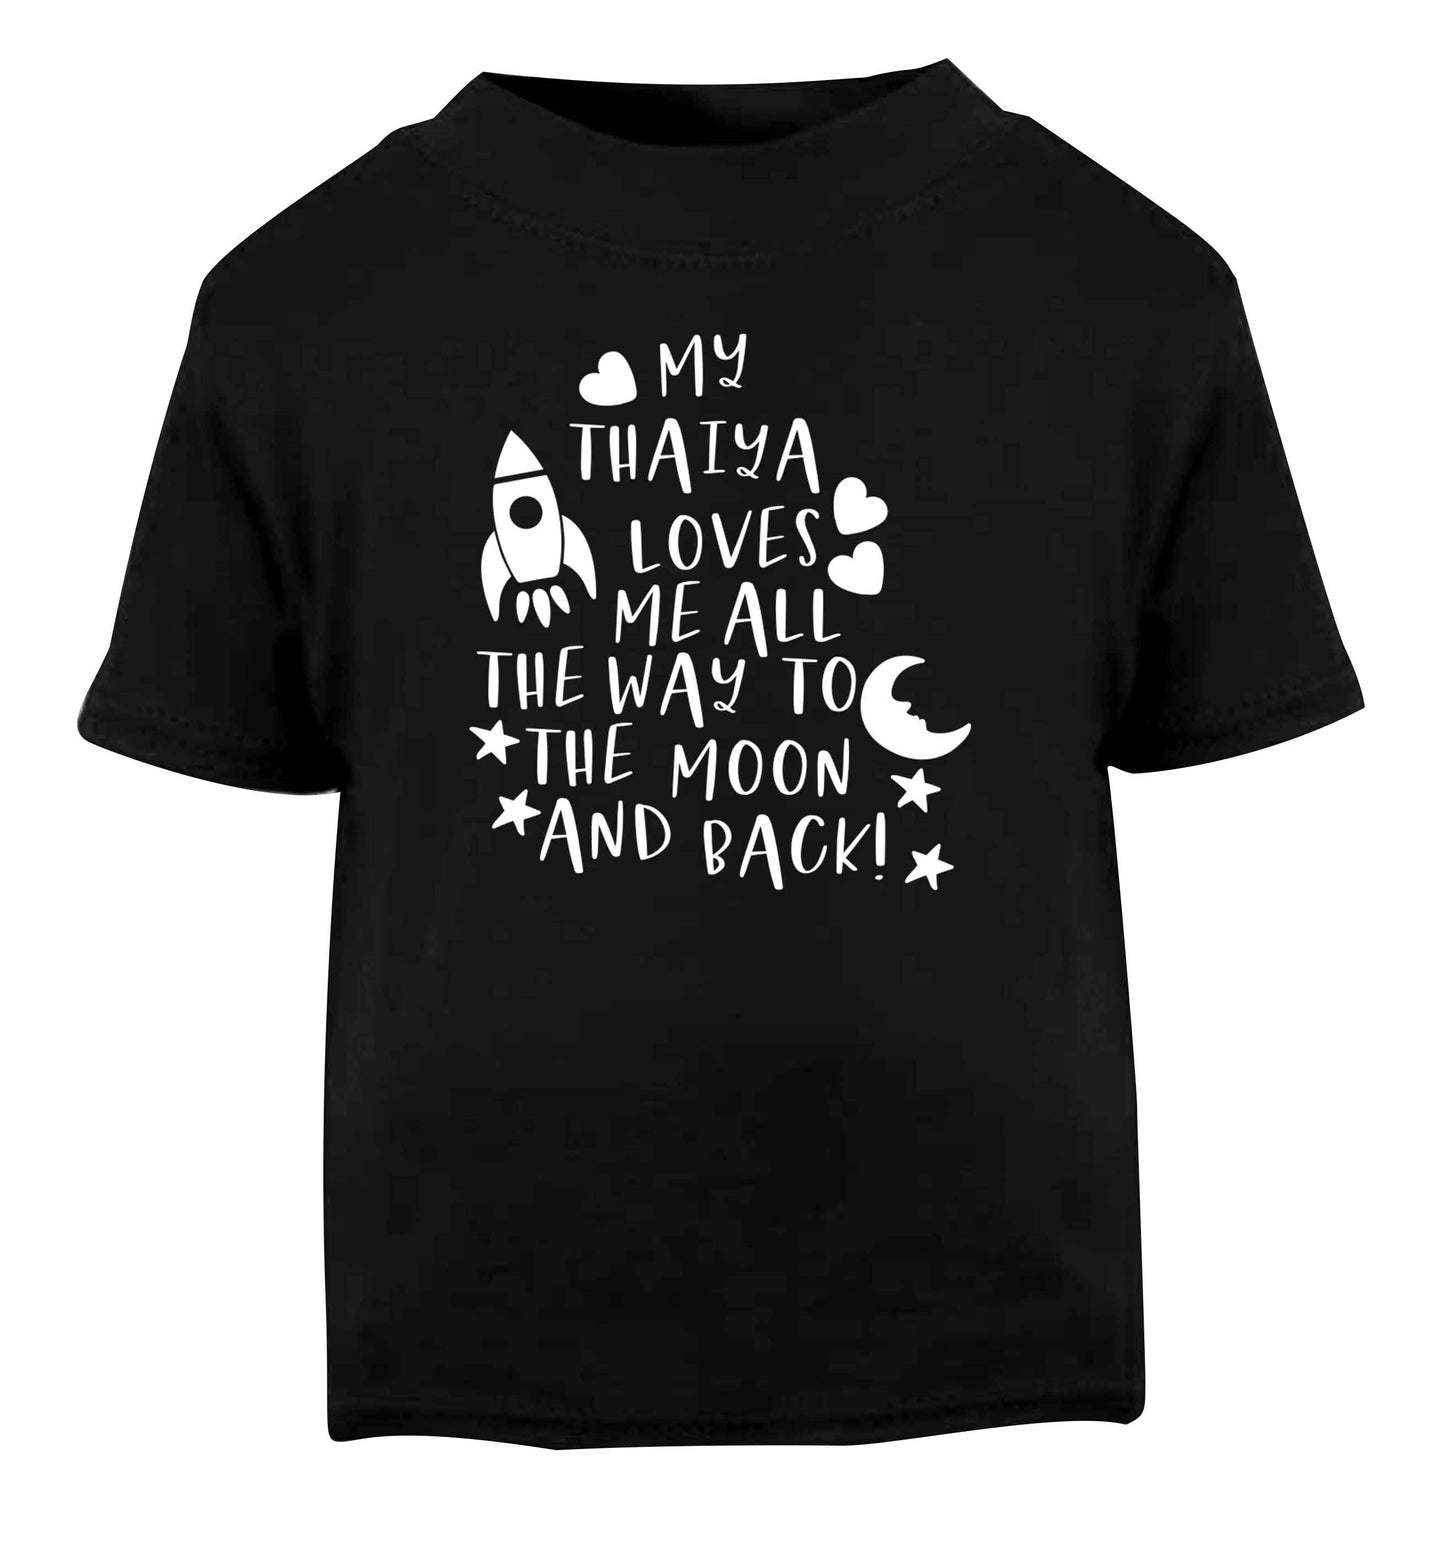 My thaiya loves me all the way to the moon and back Black Baby Toddler Tshirt 2 years